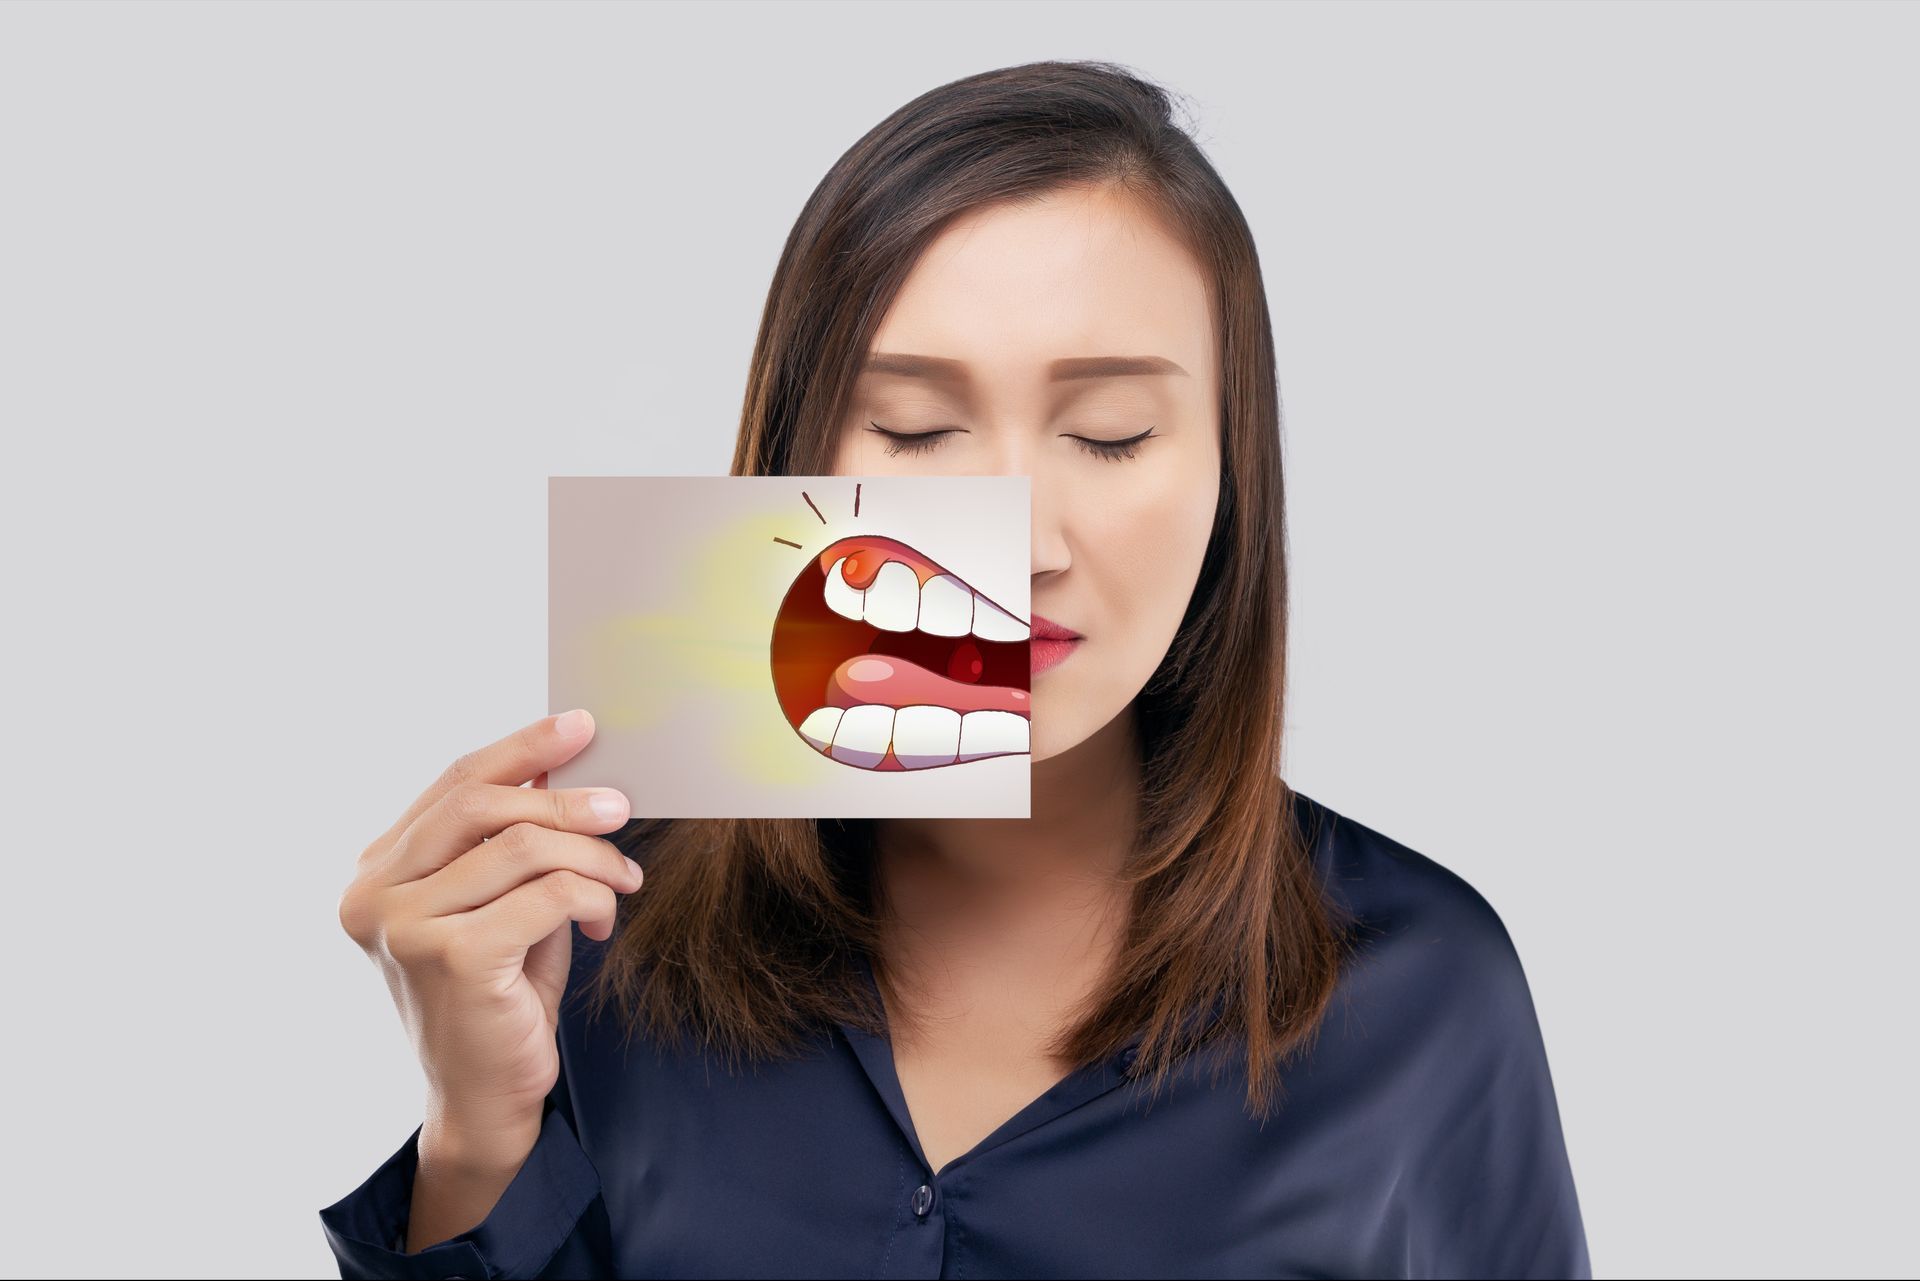 A woman is holding a picture of her mouth with a tooth missing.